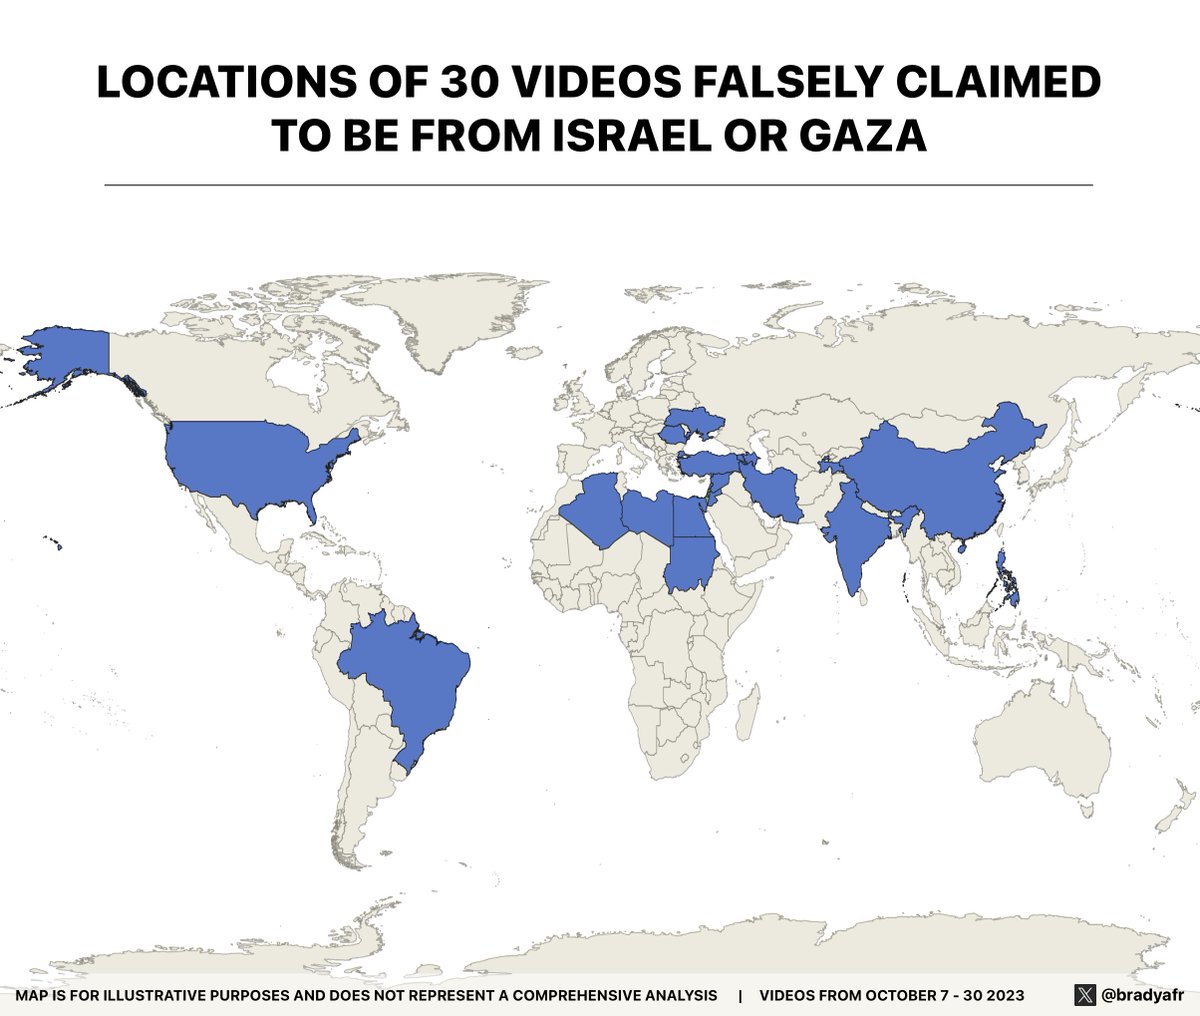 Videos falsely claiming to be from Israel or Gaza have become widespread online over the past few weeks. As this map shows, misinformation often relies on unrelated content from elsewhere in the world that is reposted with a misleading caption.